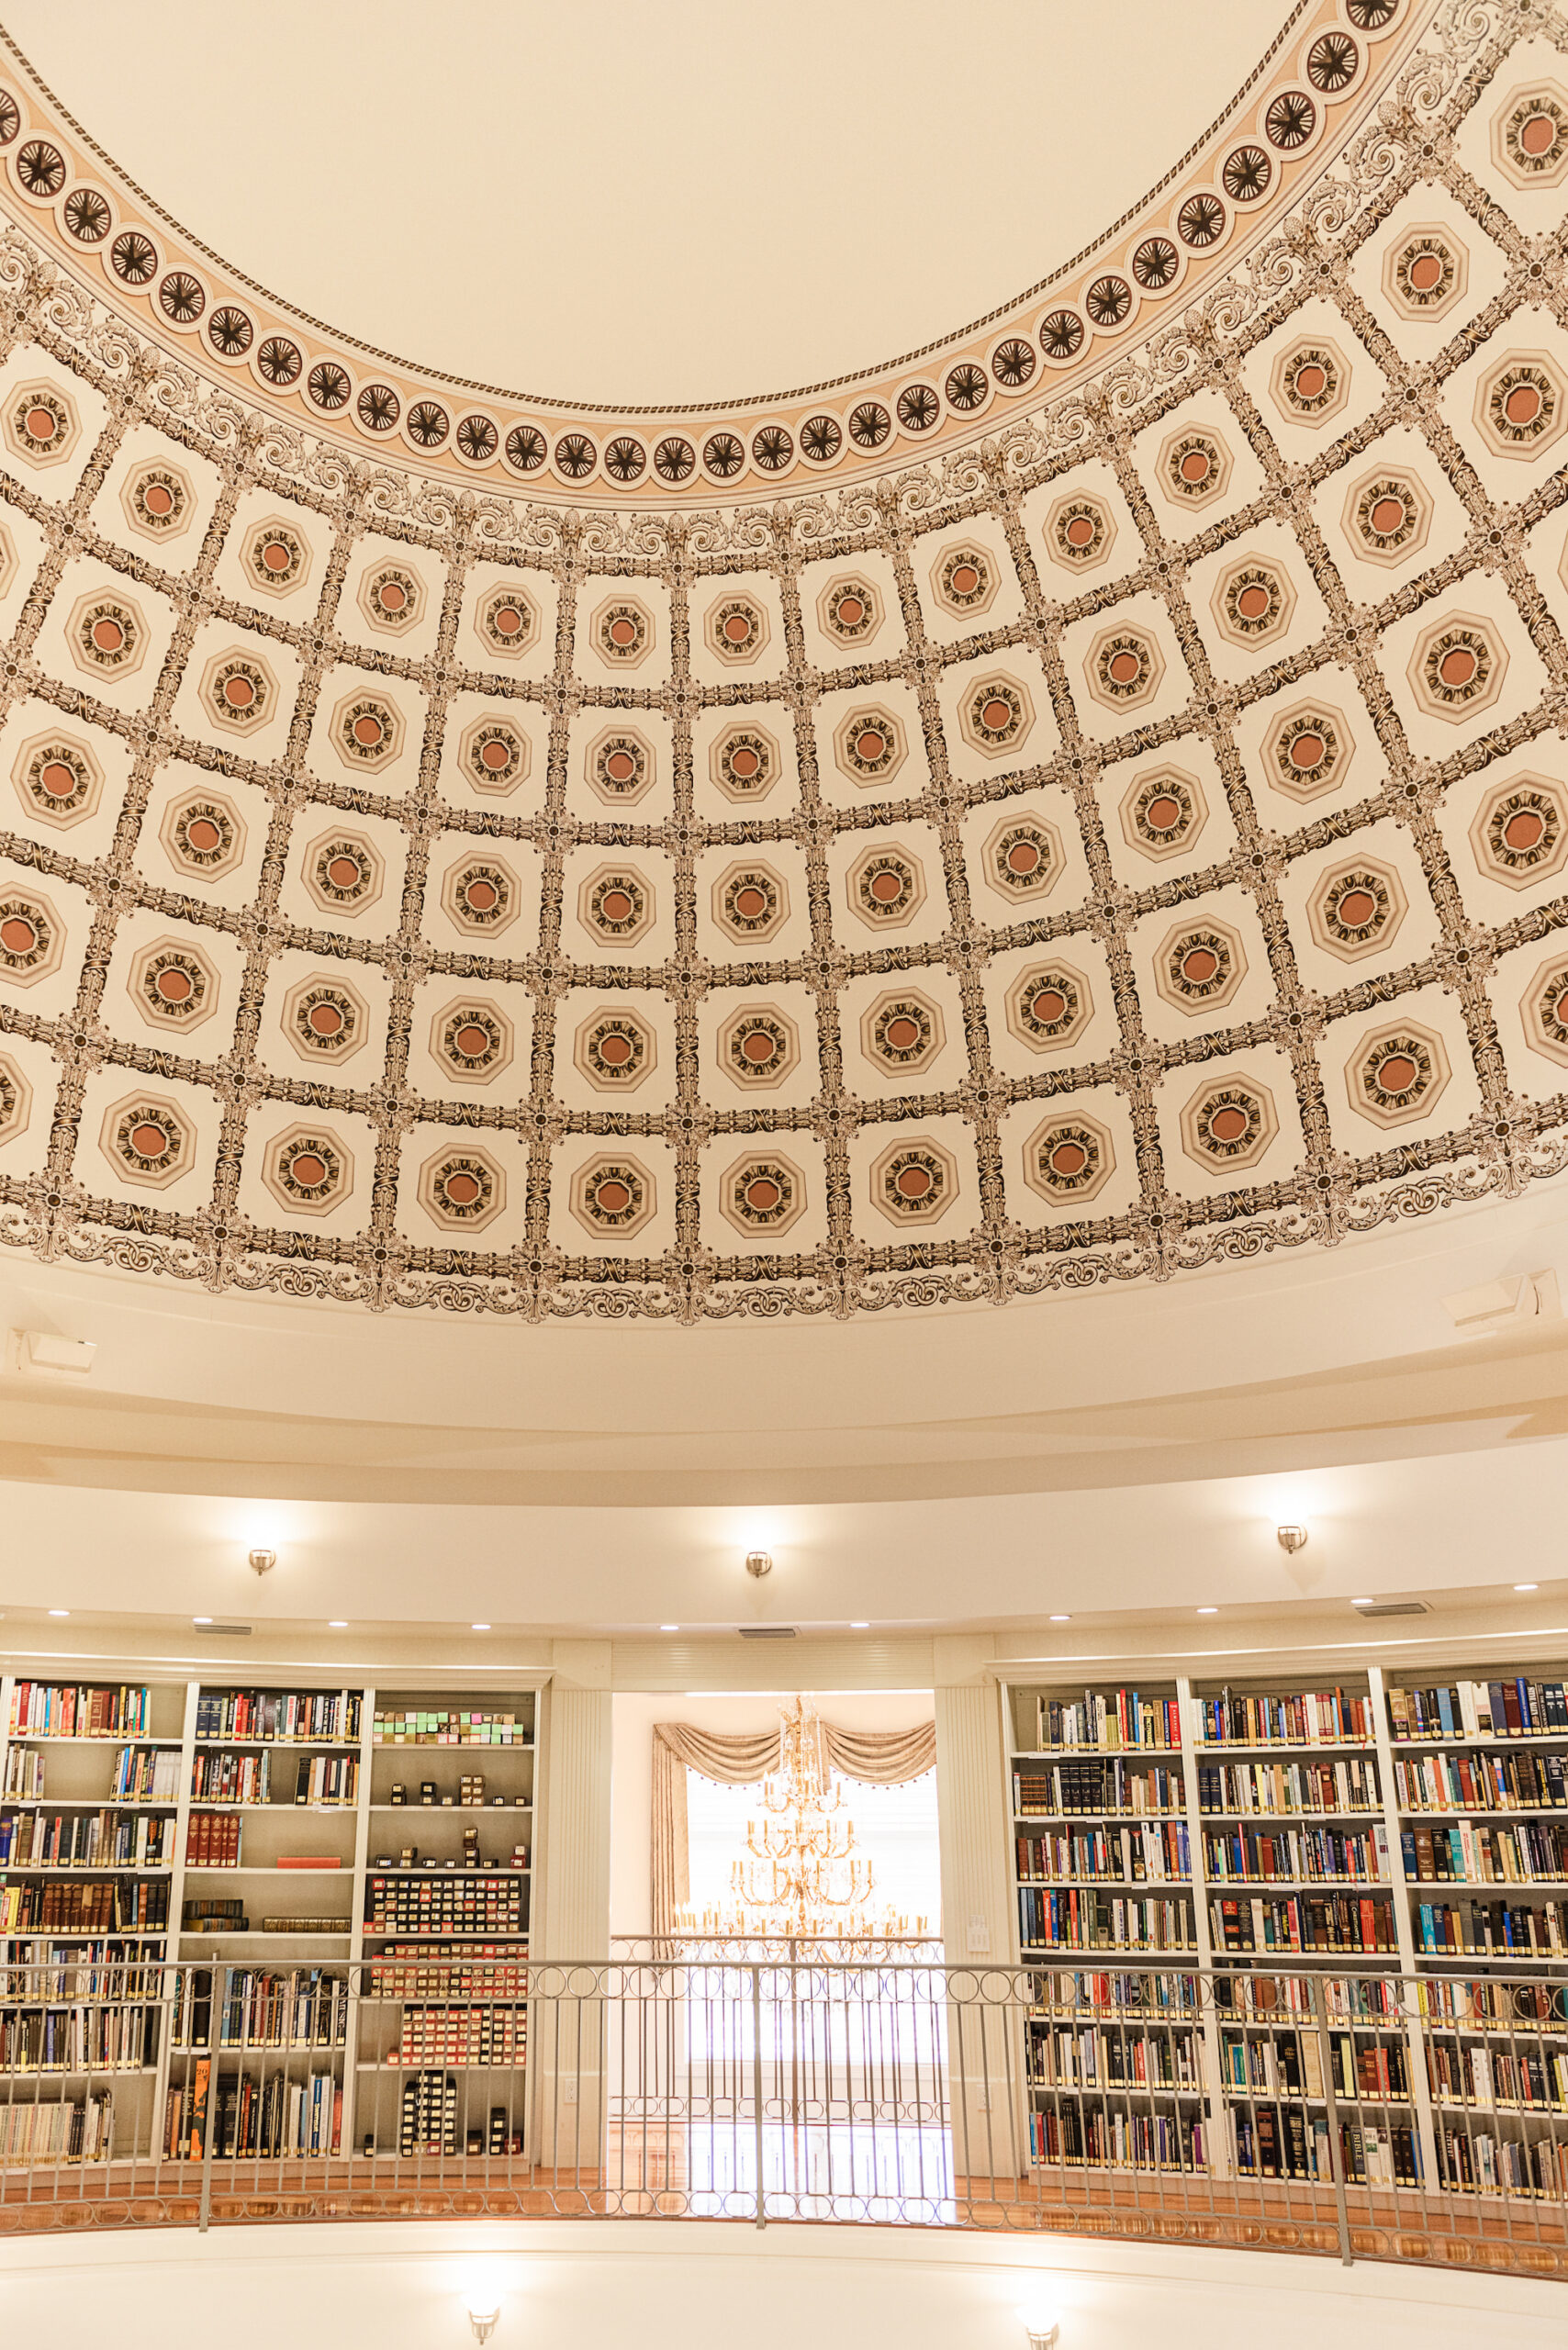 Tampa Bay Neoclassical Architectural Wedding Venue Whitehurst Gallery Second Floor Library